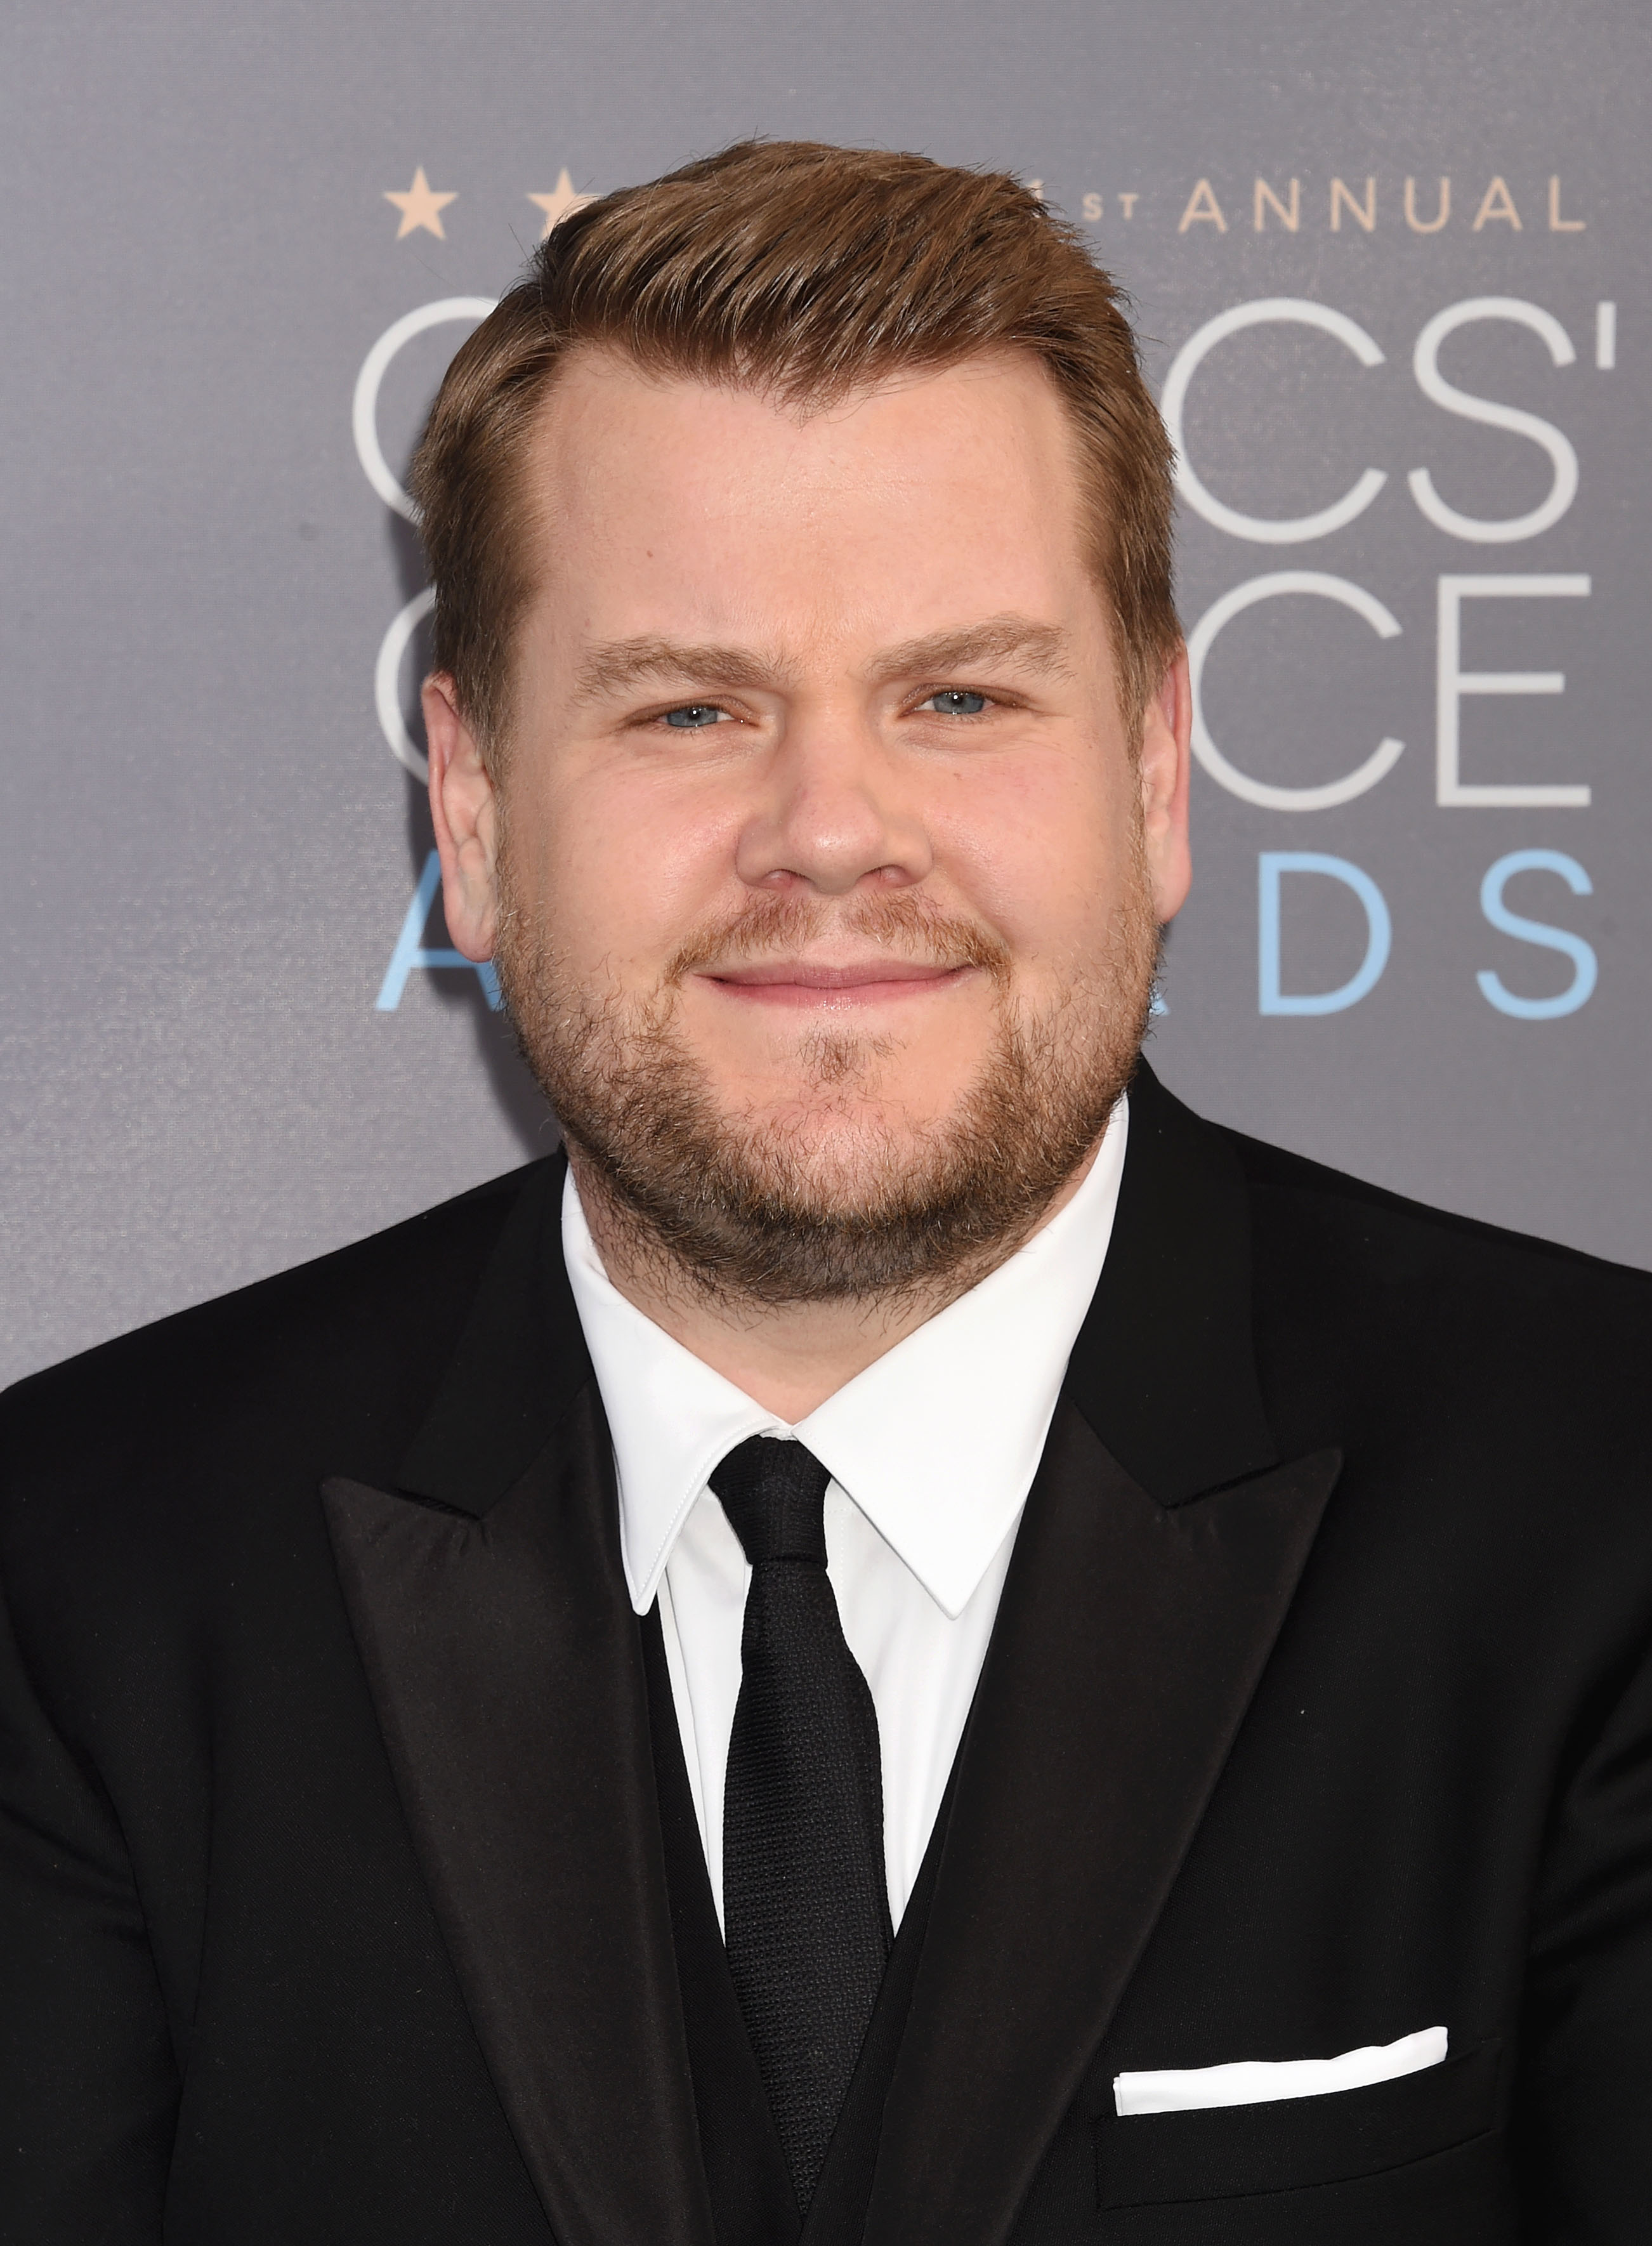 Actor/TV persoanlity James Corden attends the 21st Annual Critics' Choice Awards at Barker Hangar on January 17, 2016 in Santa Monica, California. (Jeffrey Mayer—WireImage/Getty Images)